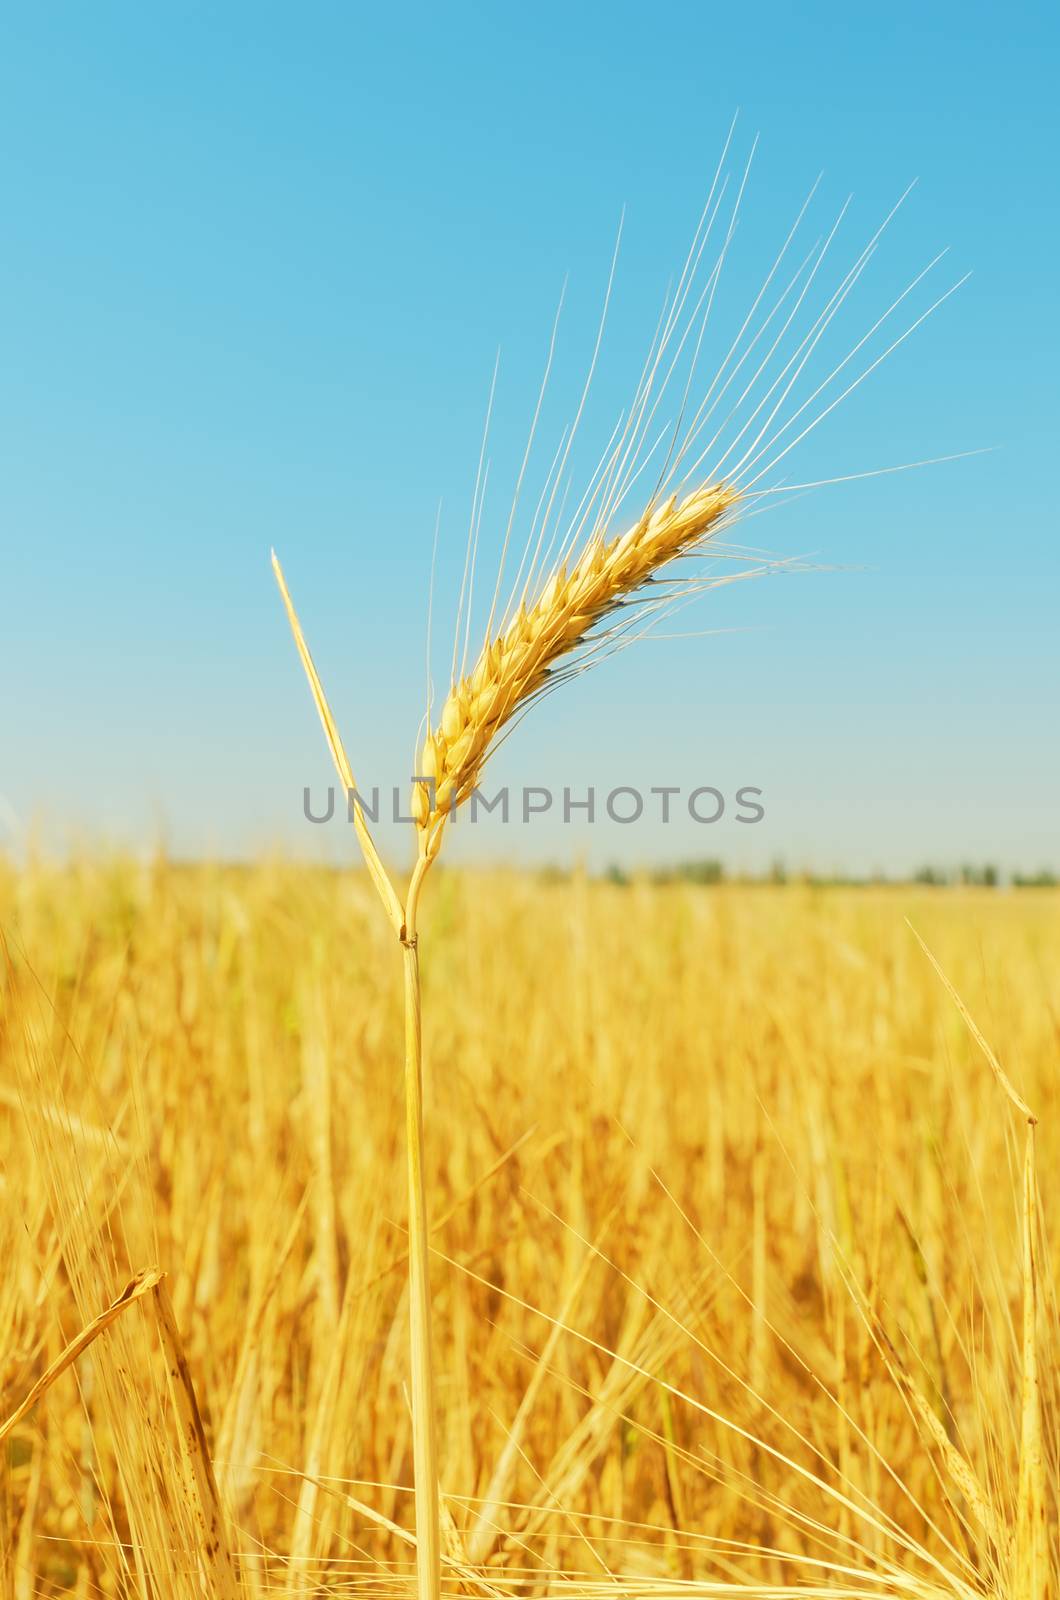 golden wheat ears on field and blue sky as background by mycola